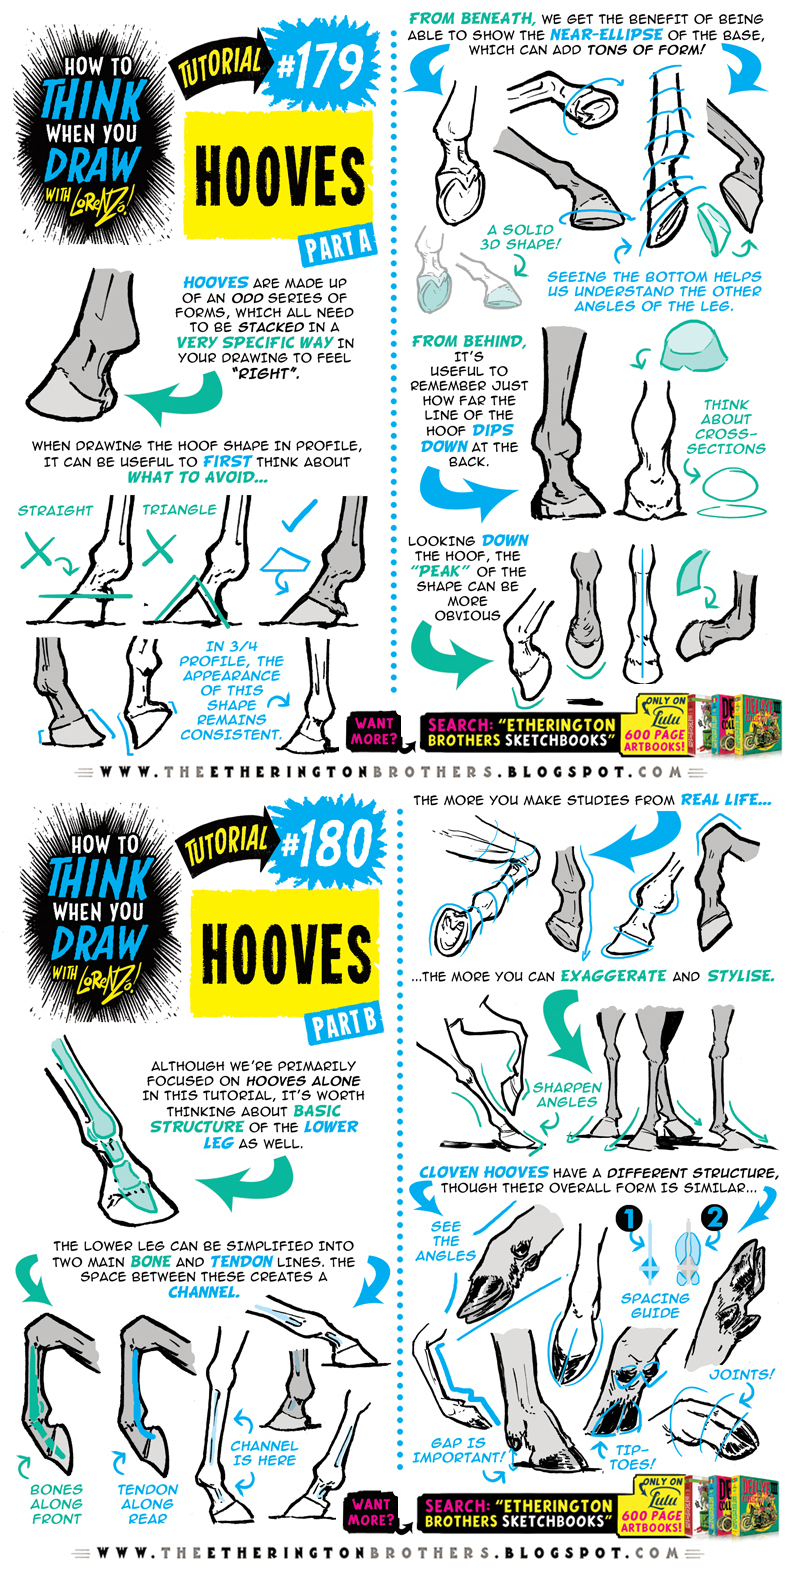 How to THINK when you draw HOOVES tutorial!